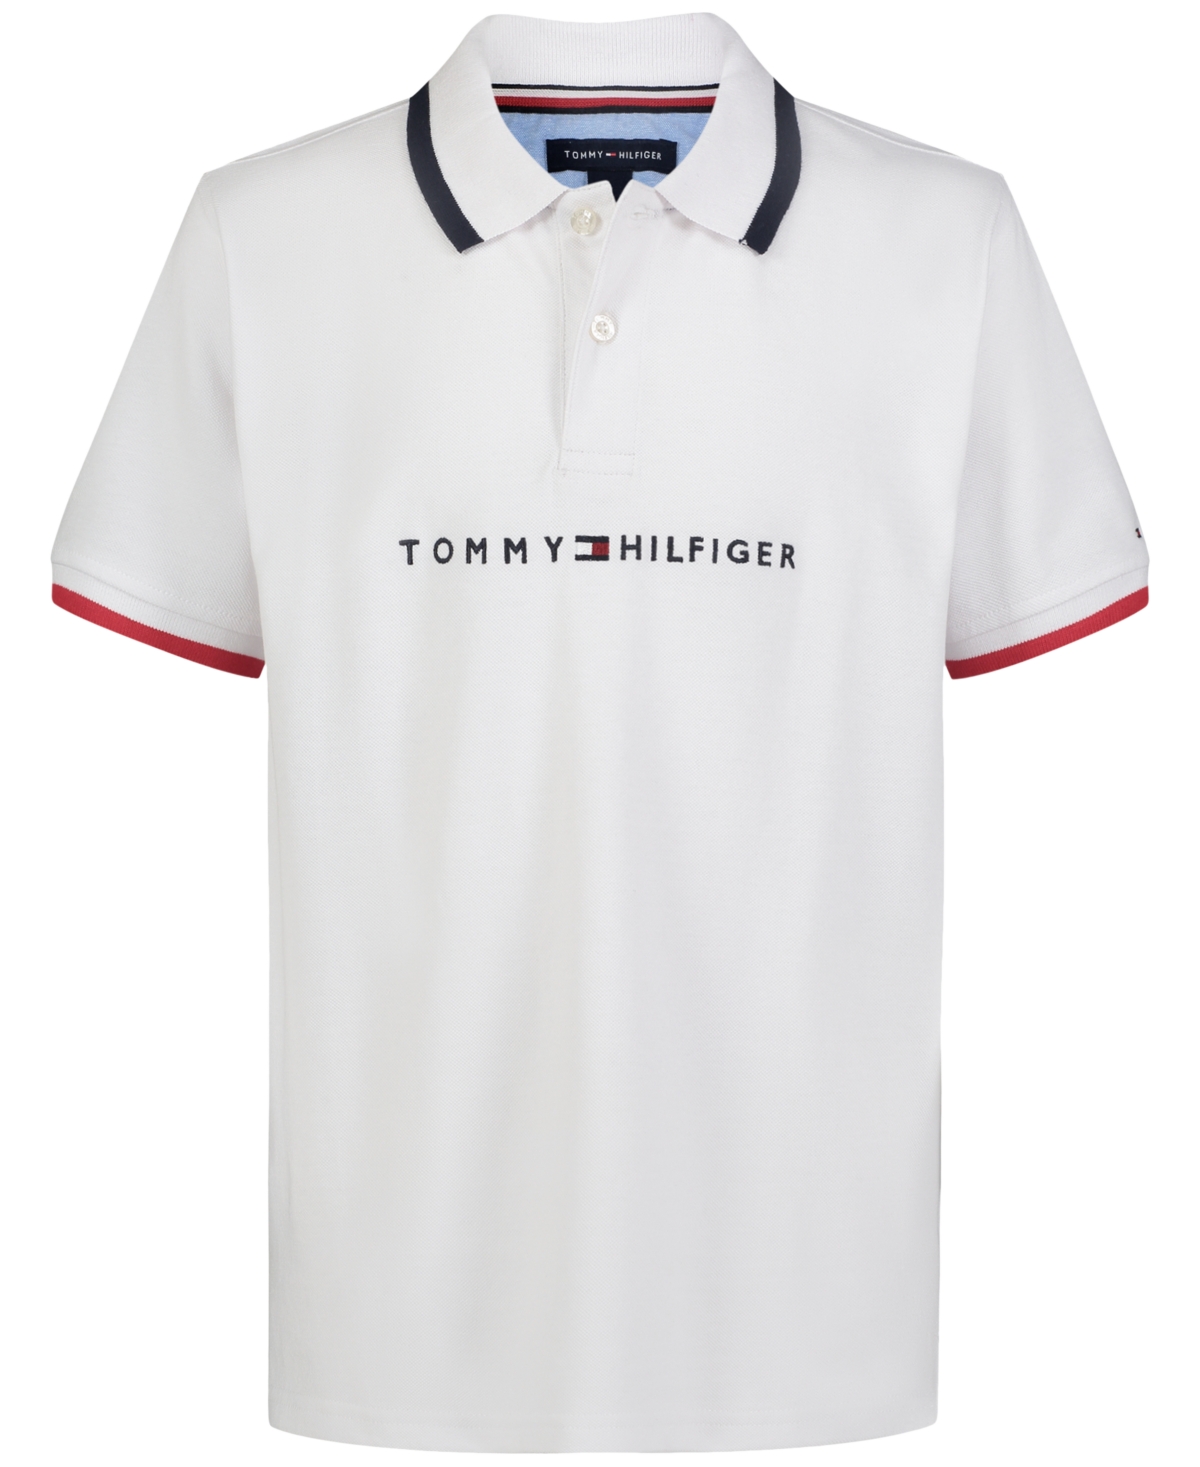 Tommy Hilfiger Kids' Toddler Boys Tomas Embroidered Logo Polo Shirt In Fresh Whit